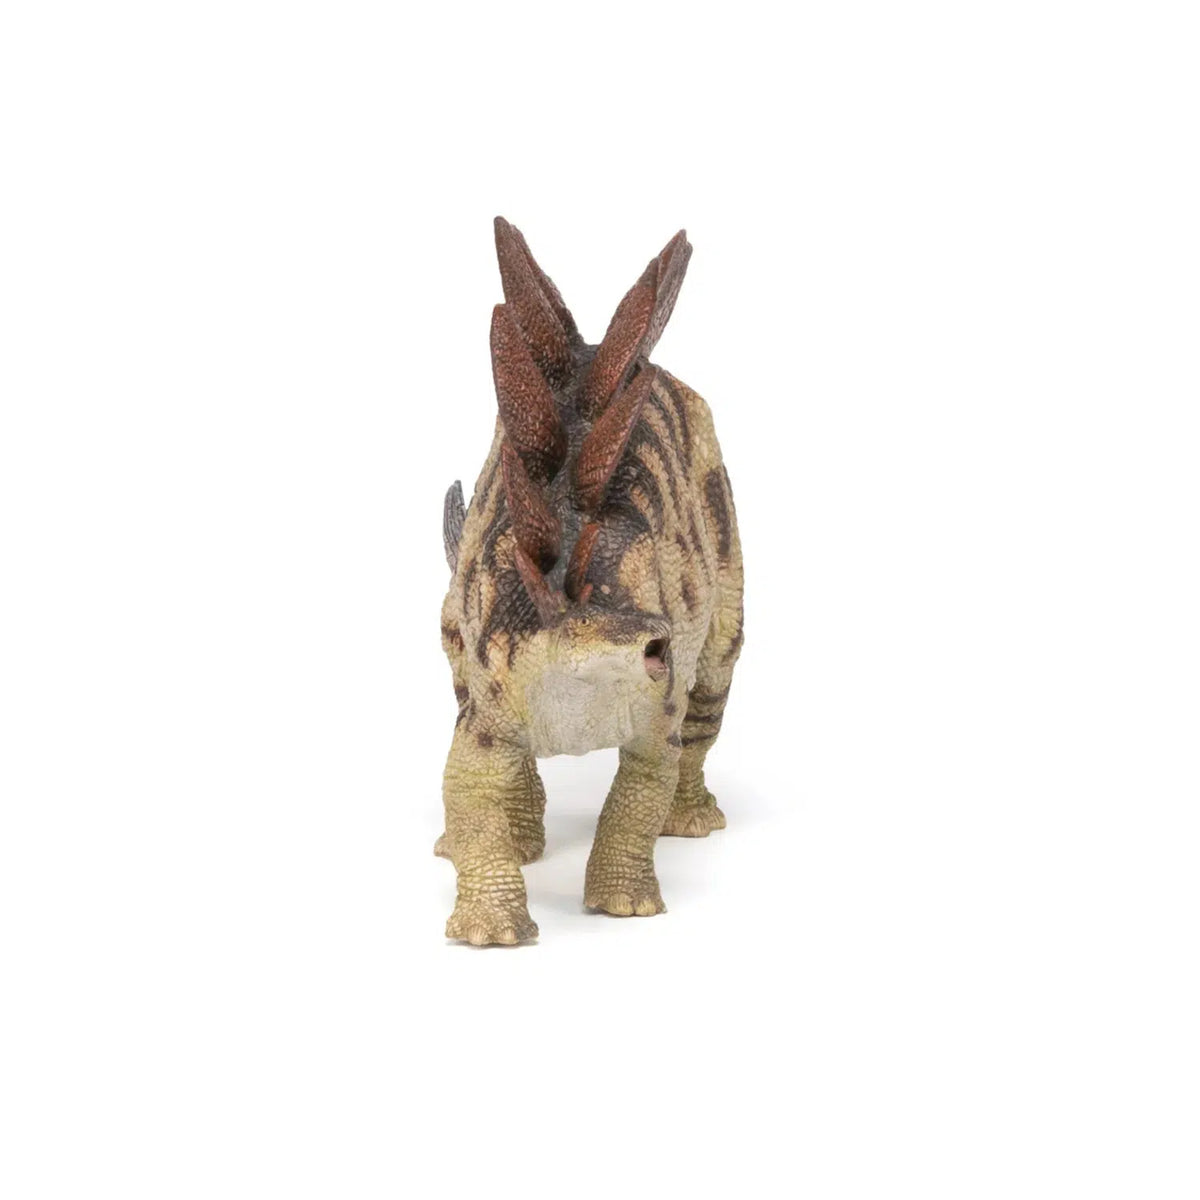 Front view of the Stegosaurus figurine.